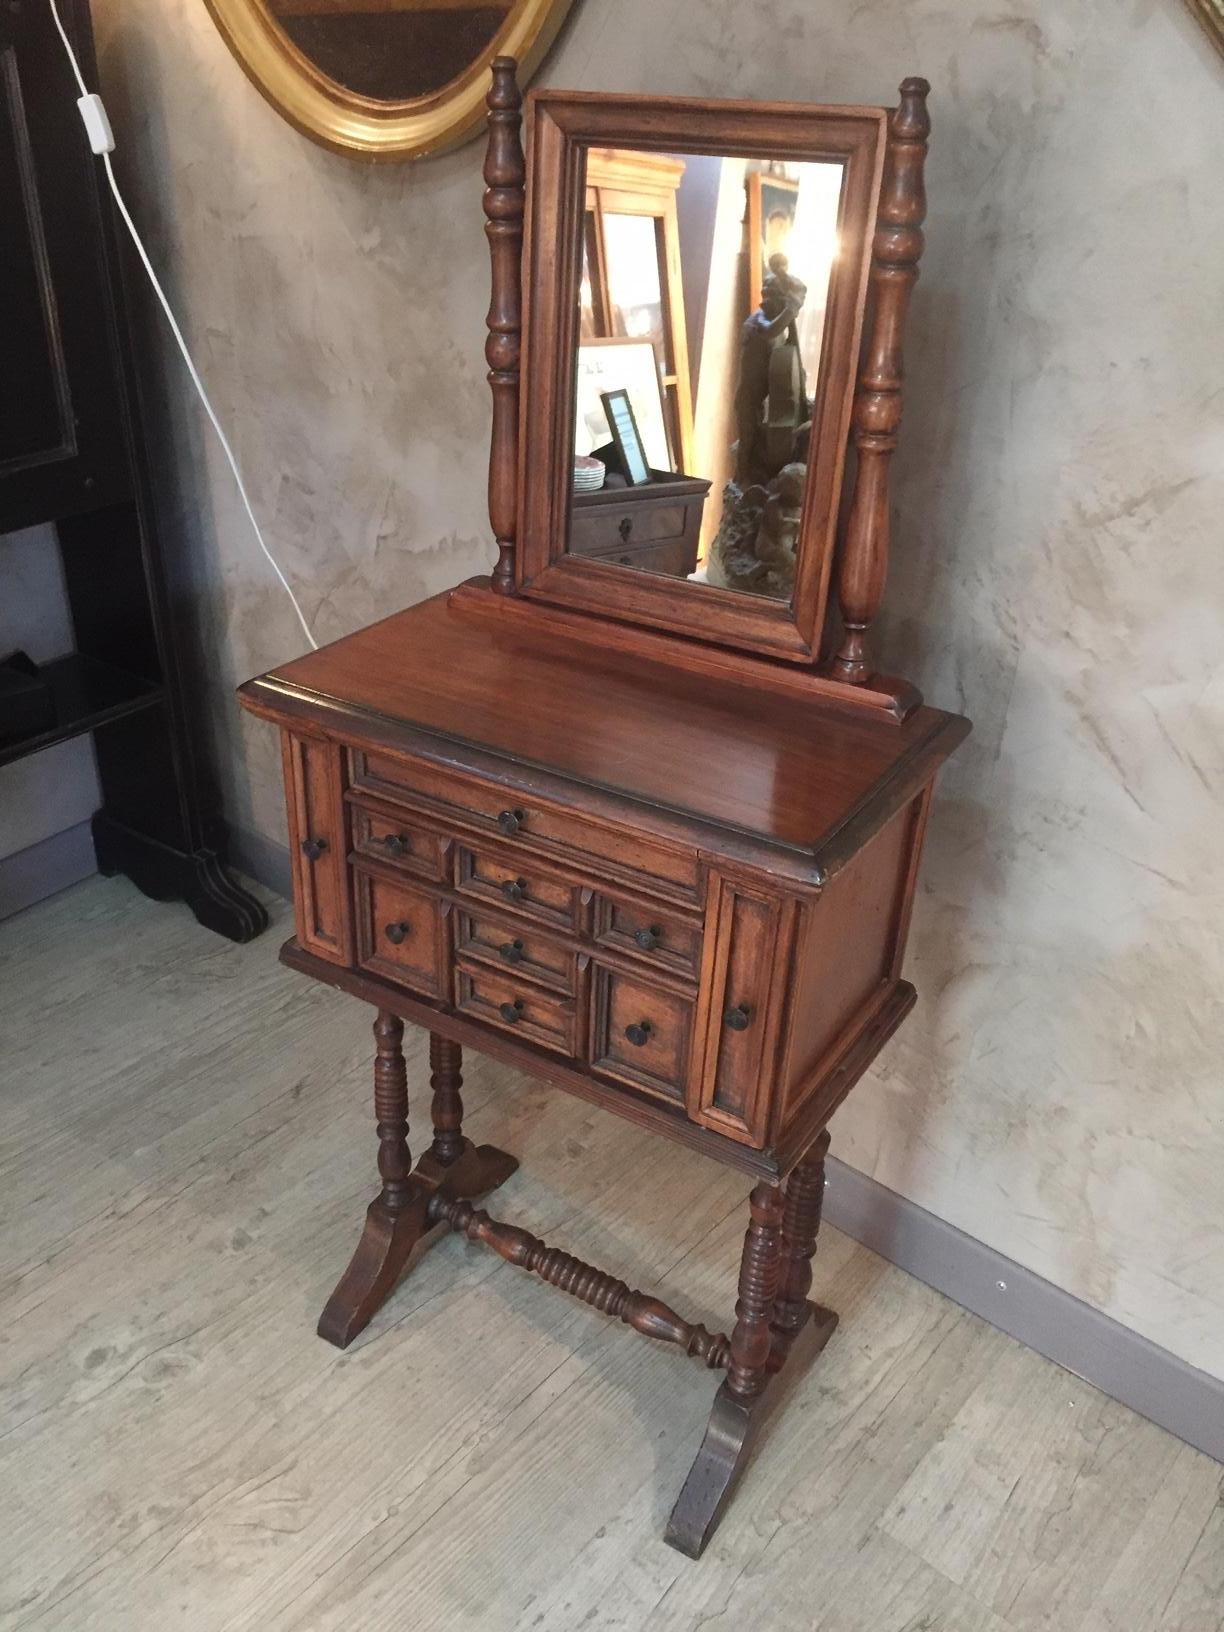 Rare early 20th century French walnut dressing table from the 1920s.
Not common because of the two extremities drawers opening on the inside. And the small size of this dressing table. Small others drawers and one moving mirror in the middle.
The